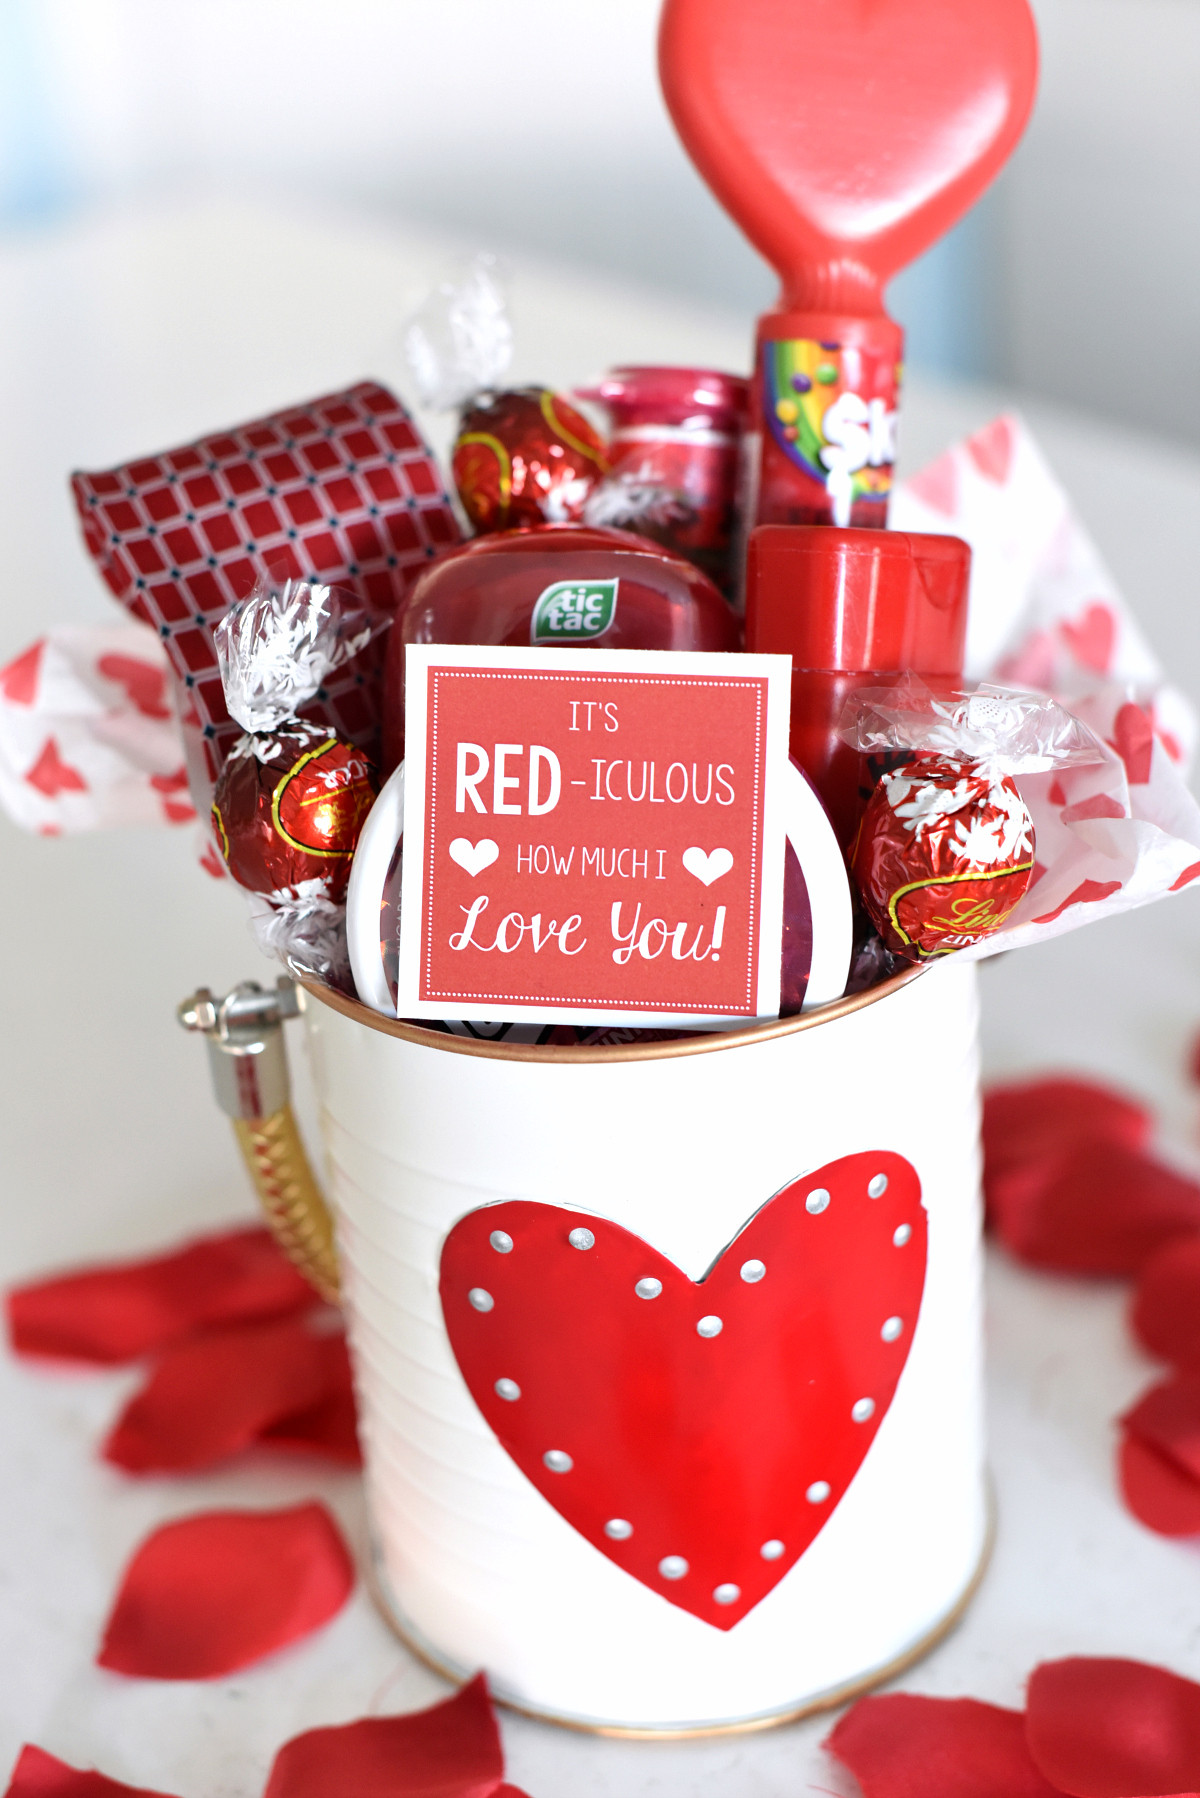 Creative Valentine Day Gift Ideas For Him
 Cute Valentine s Day Gift Idea RED iculous Basket